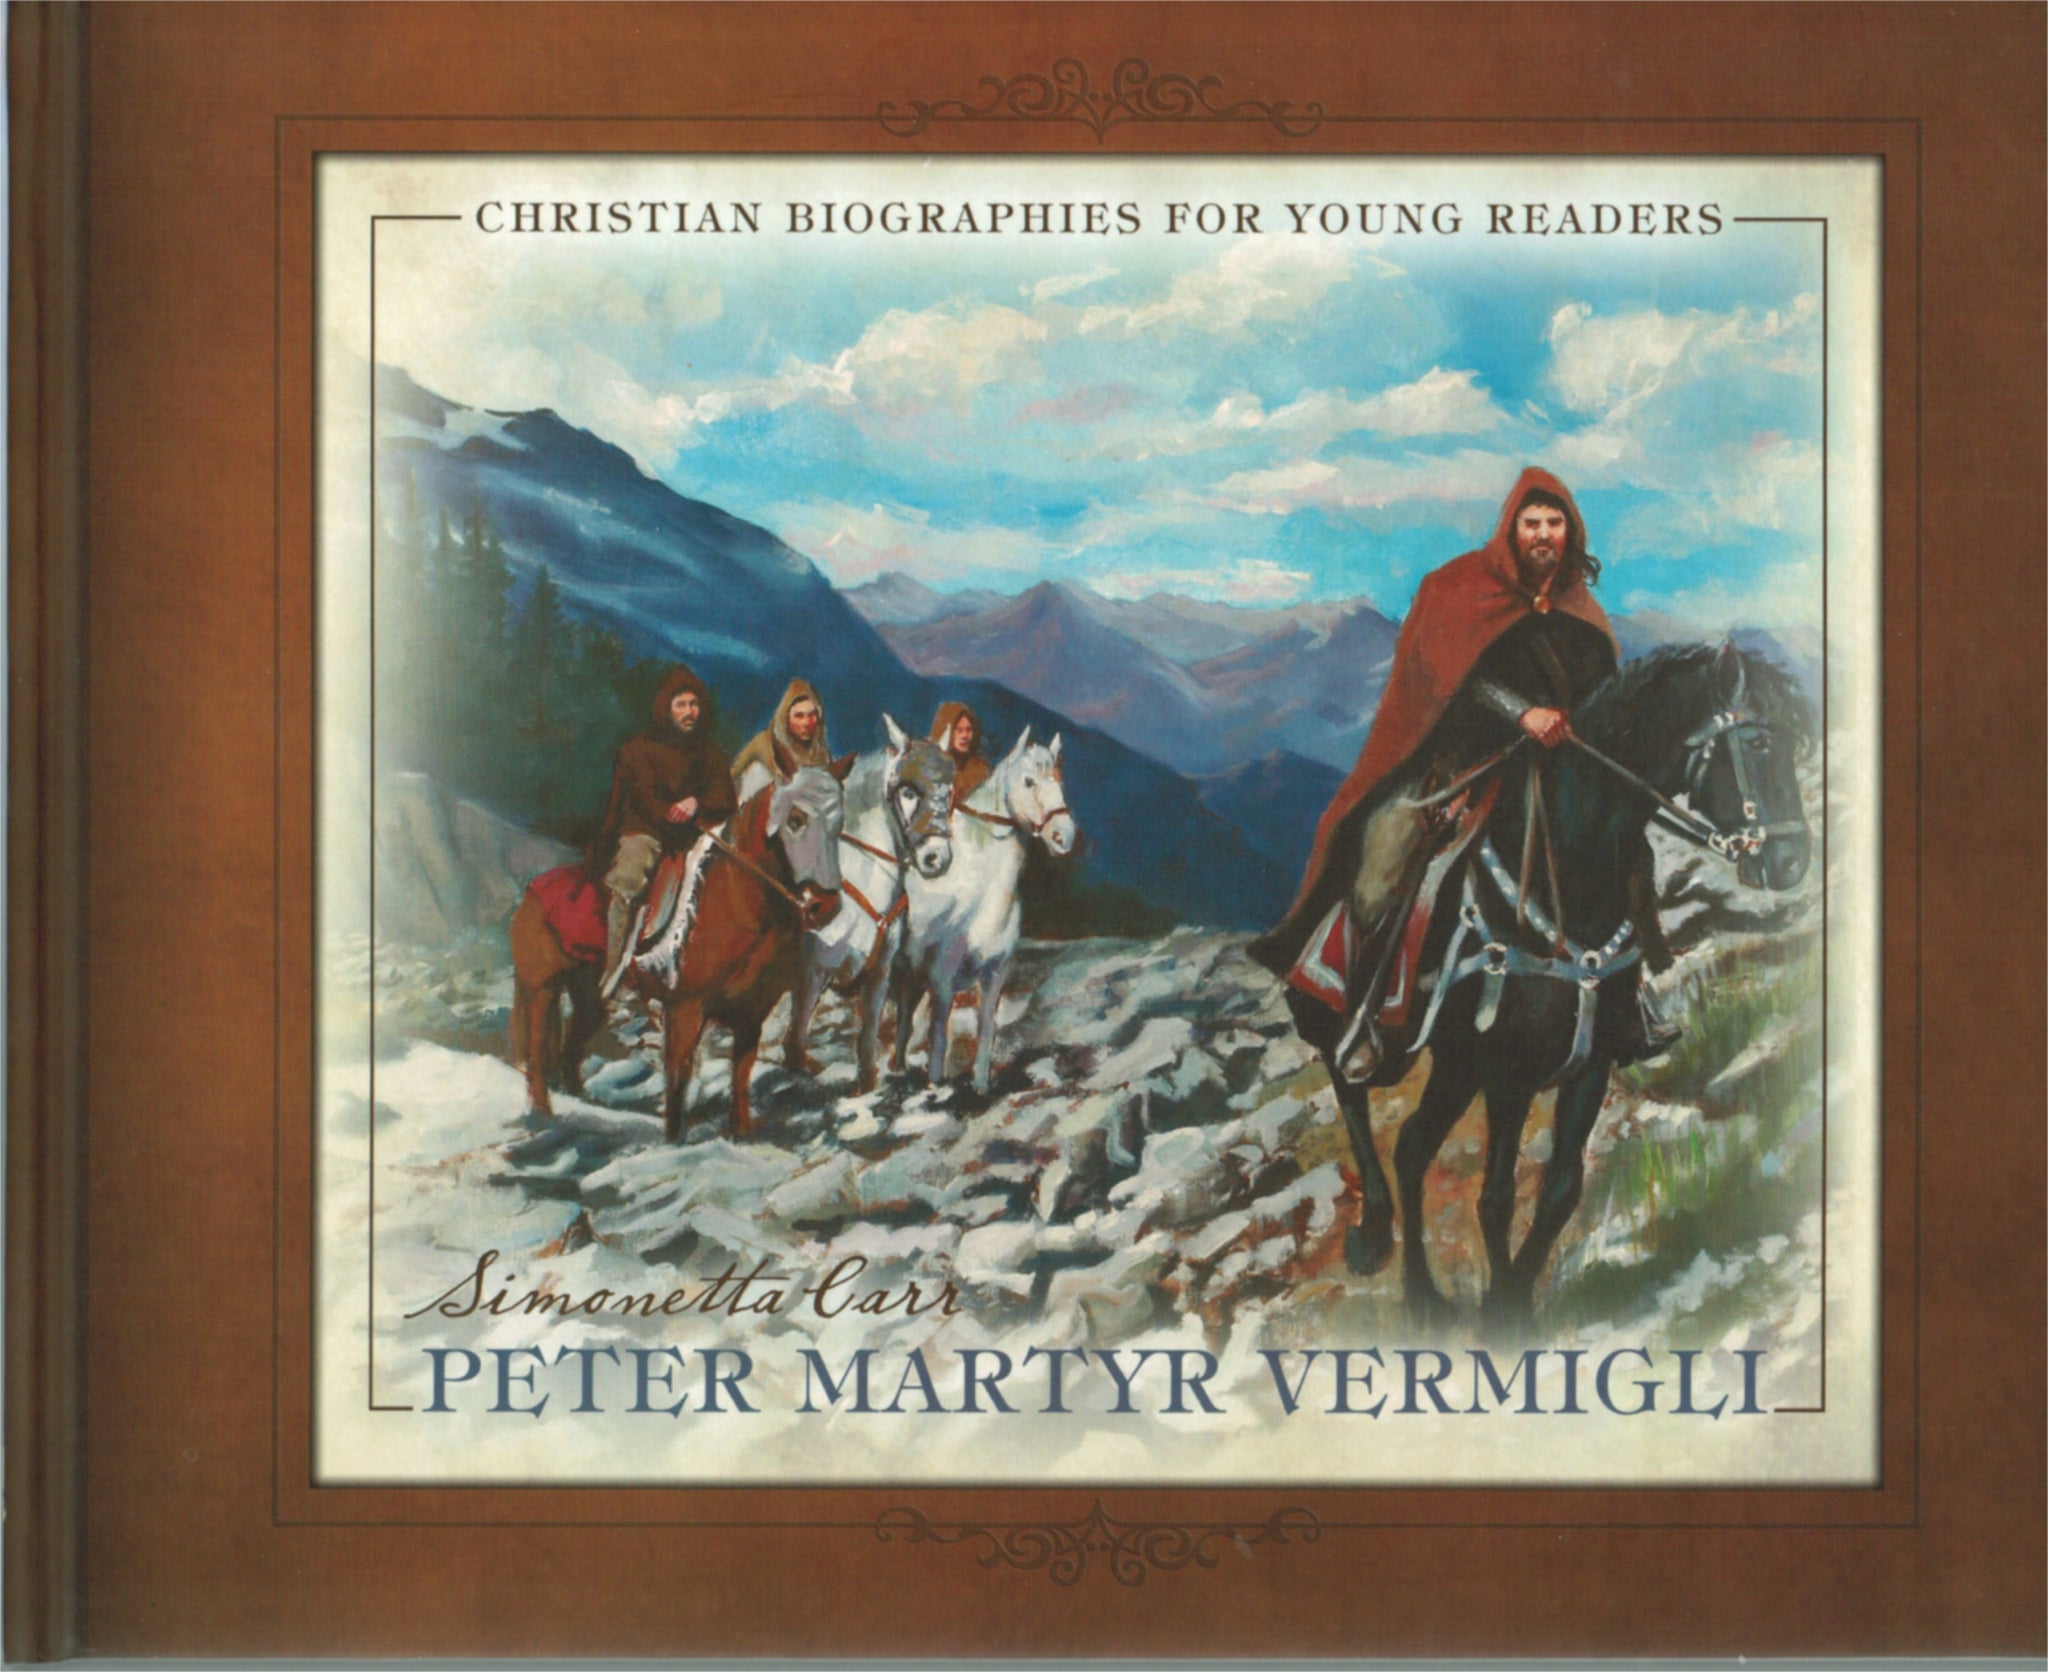 Christian Biographies for Young Readers - Peter Martyr Vermigli